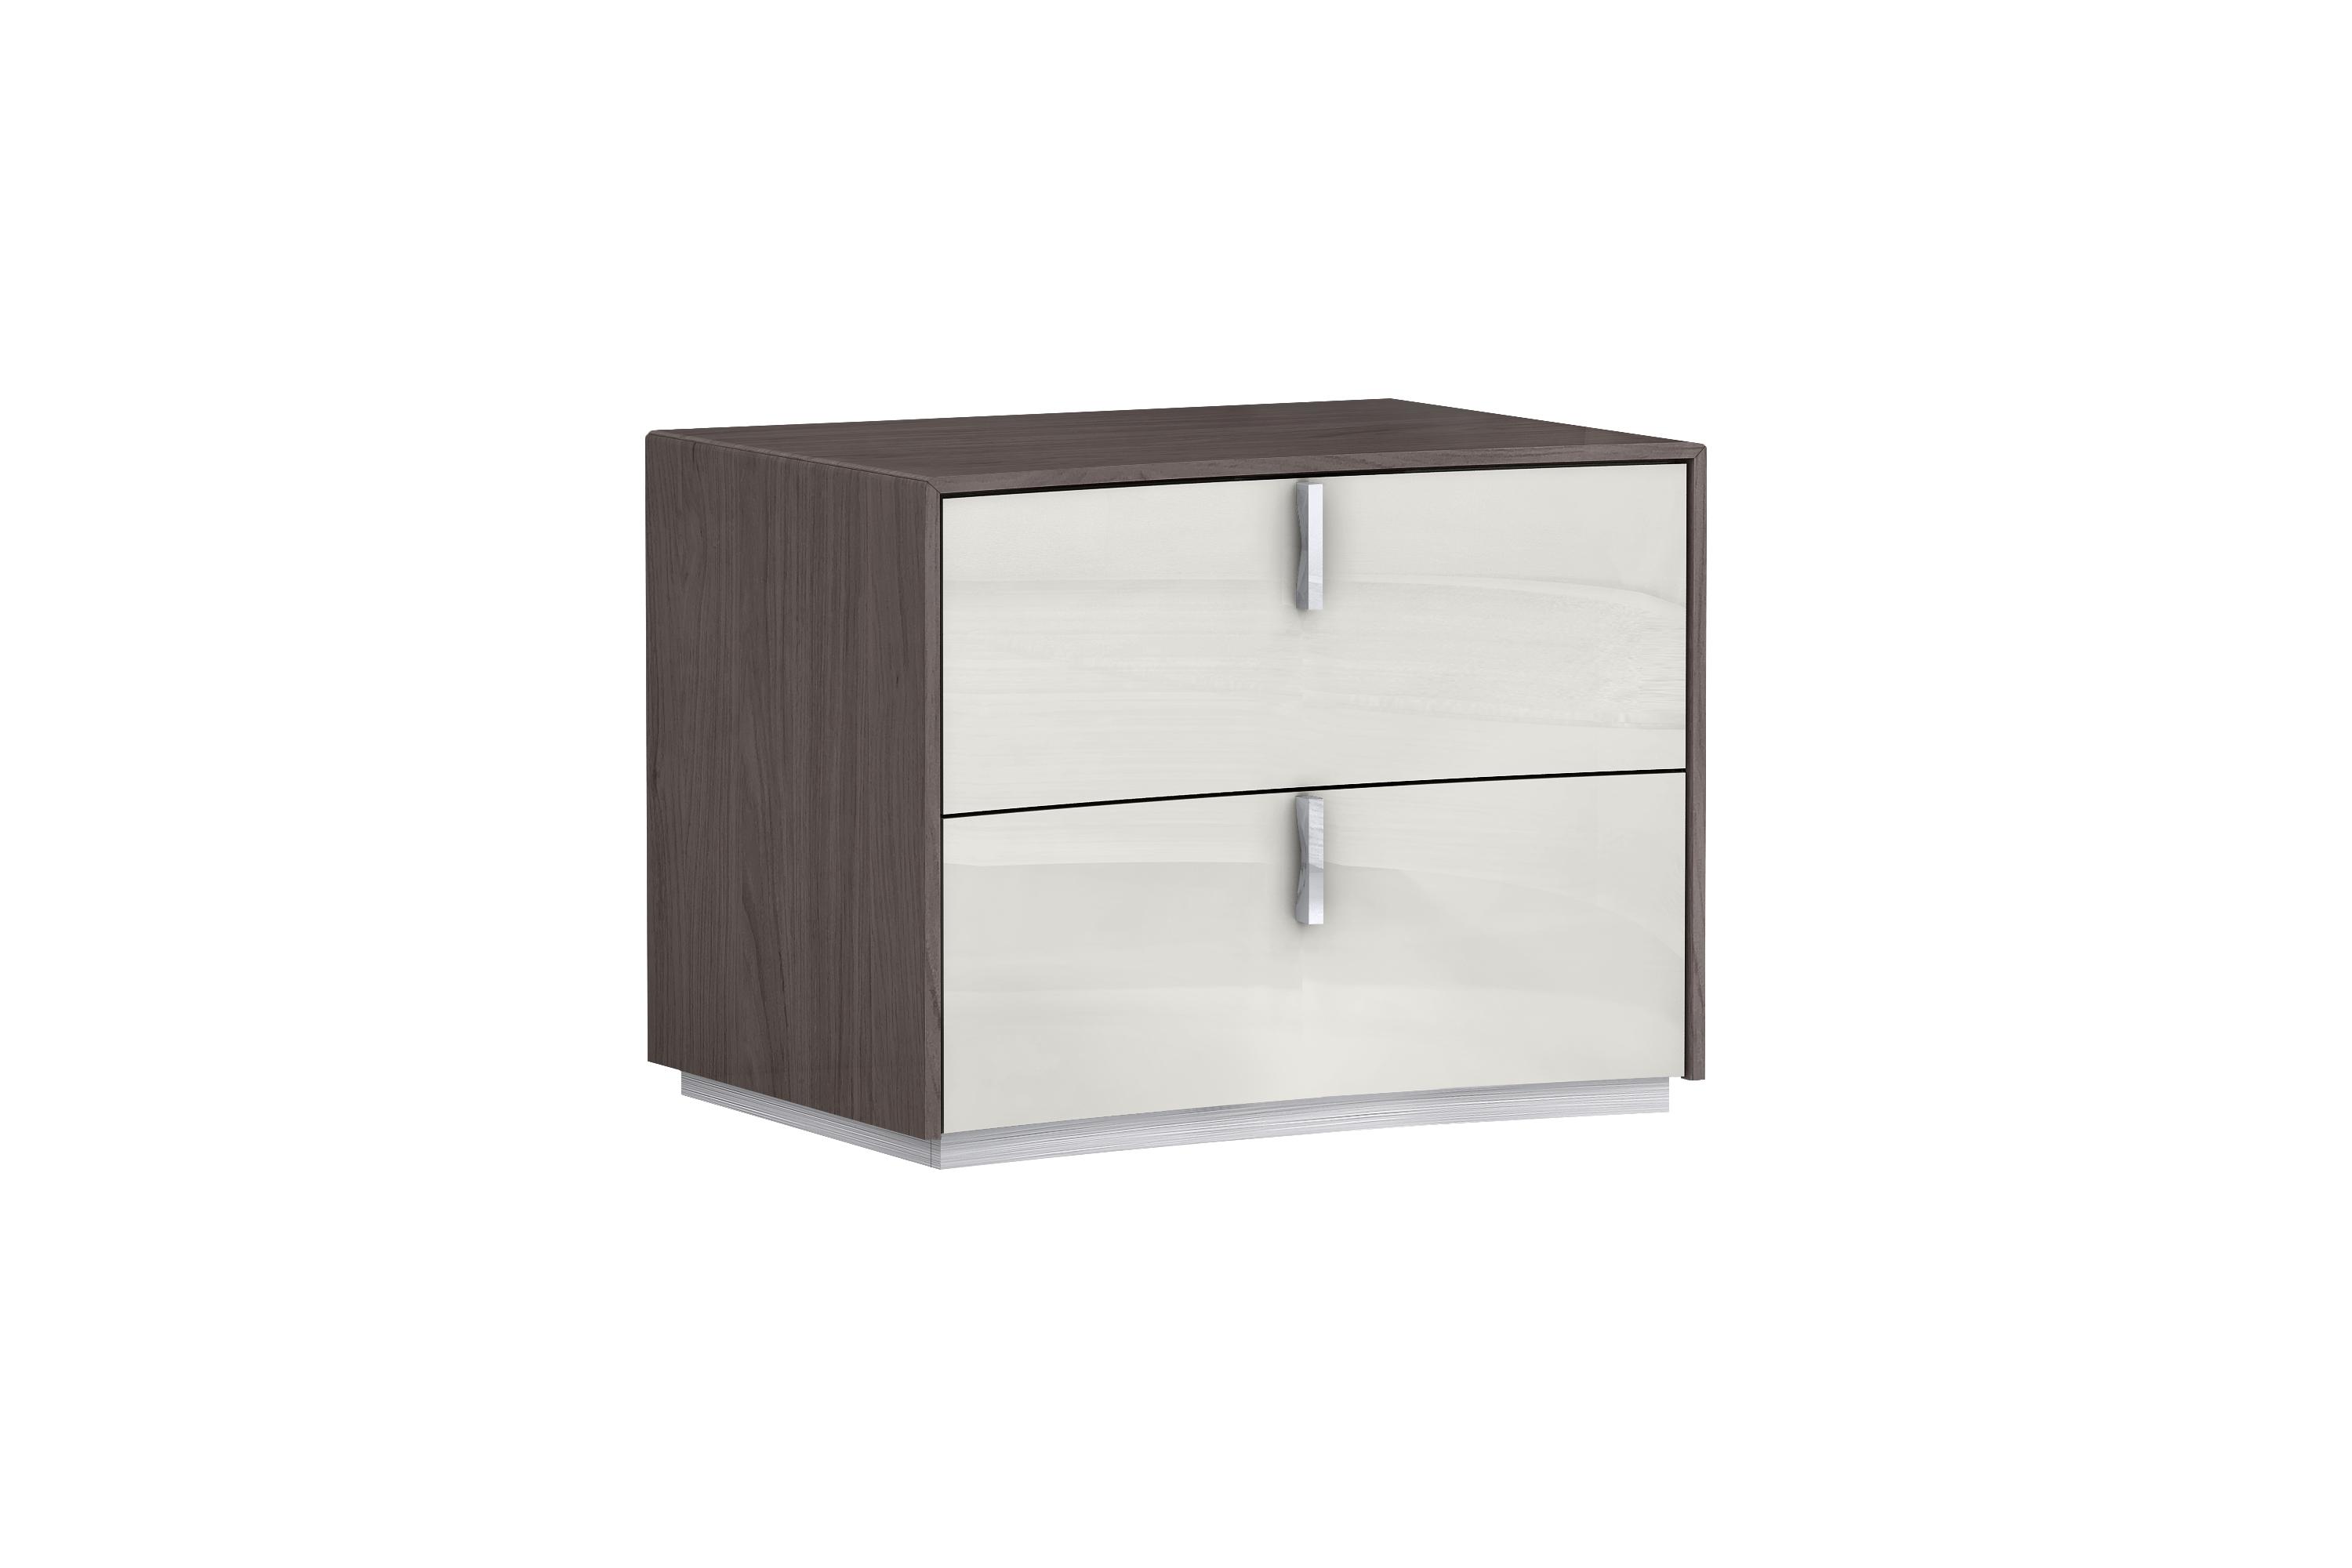 

    
Contemporary Chestnut Finish Solid Wood Nightstand NS1754-GRY/LGRY Berlin
